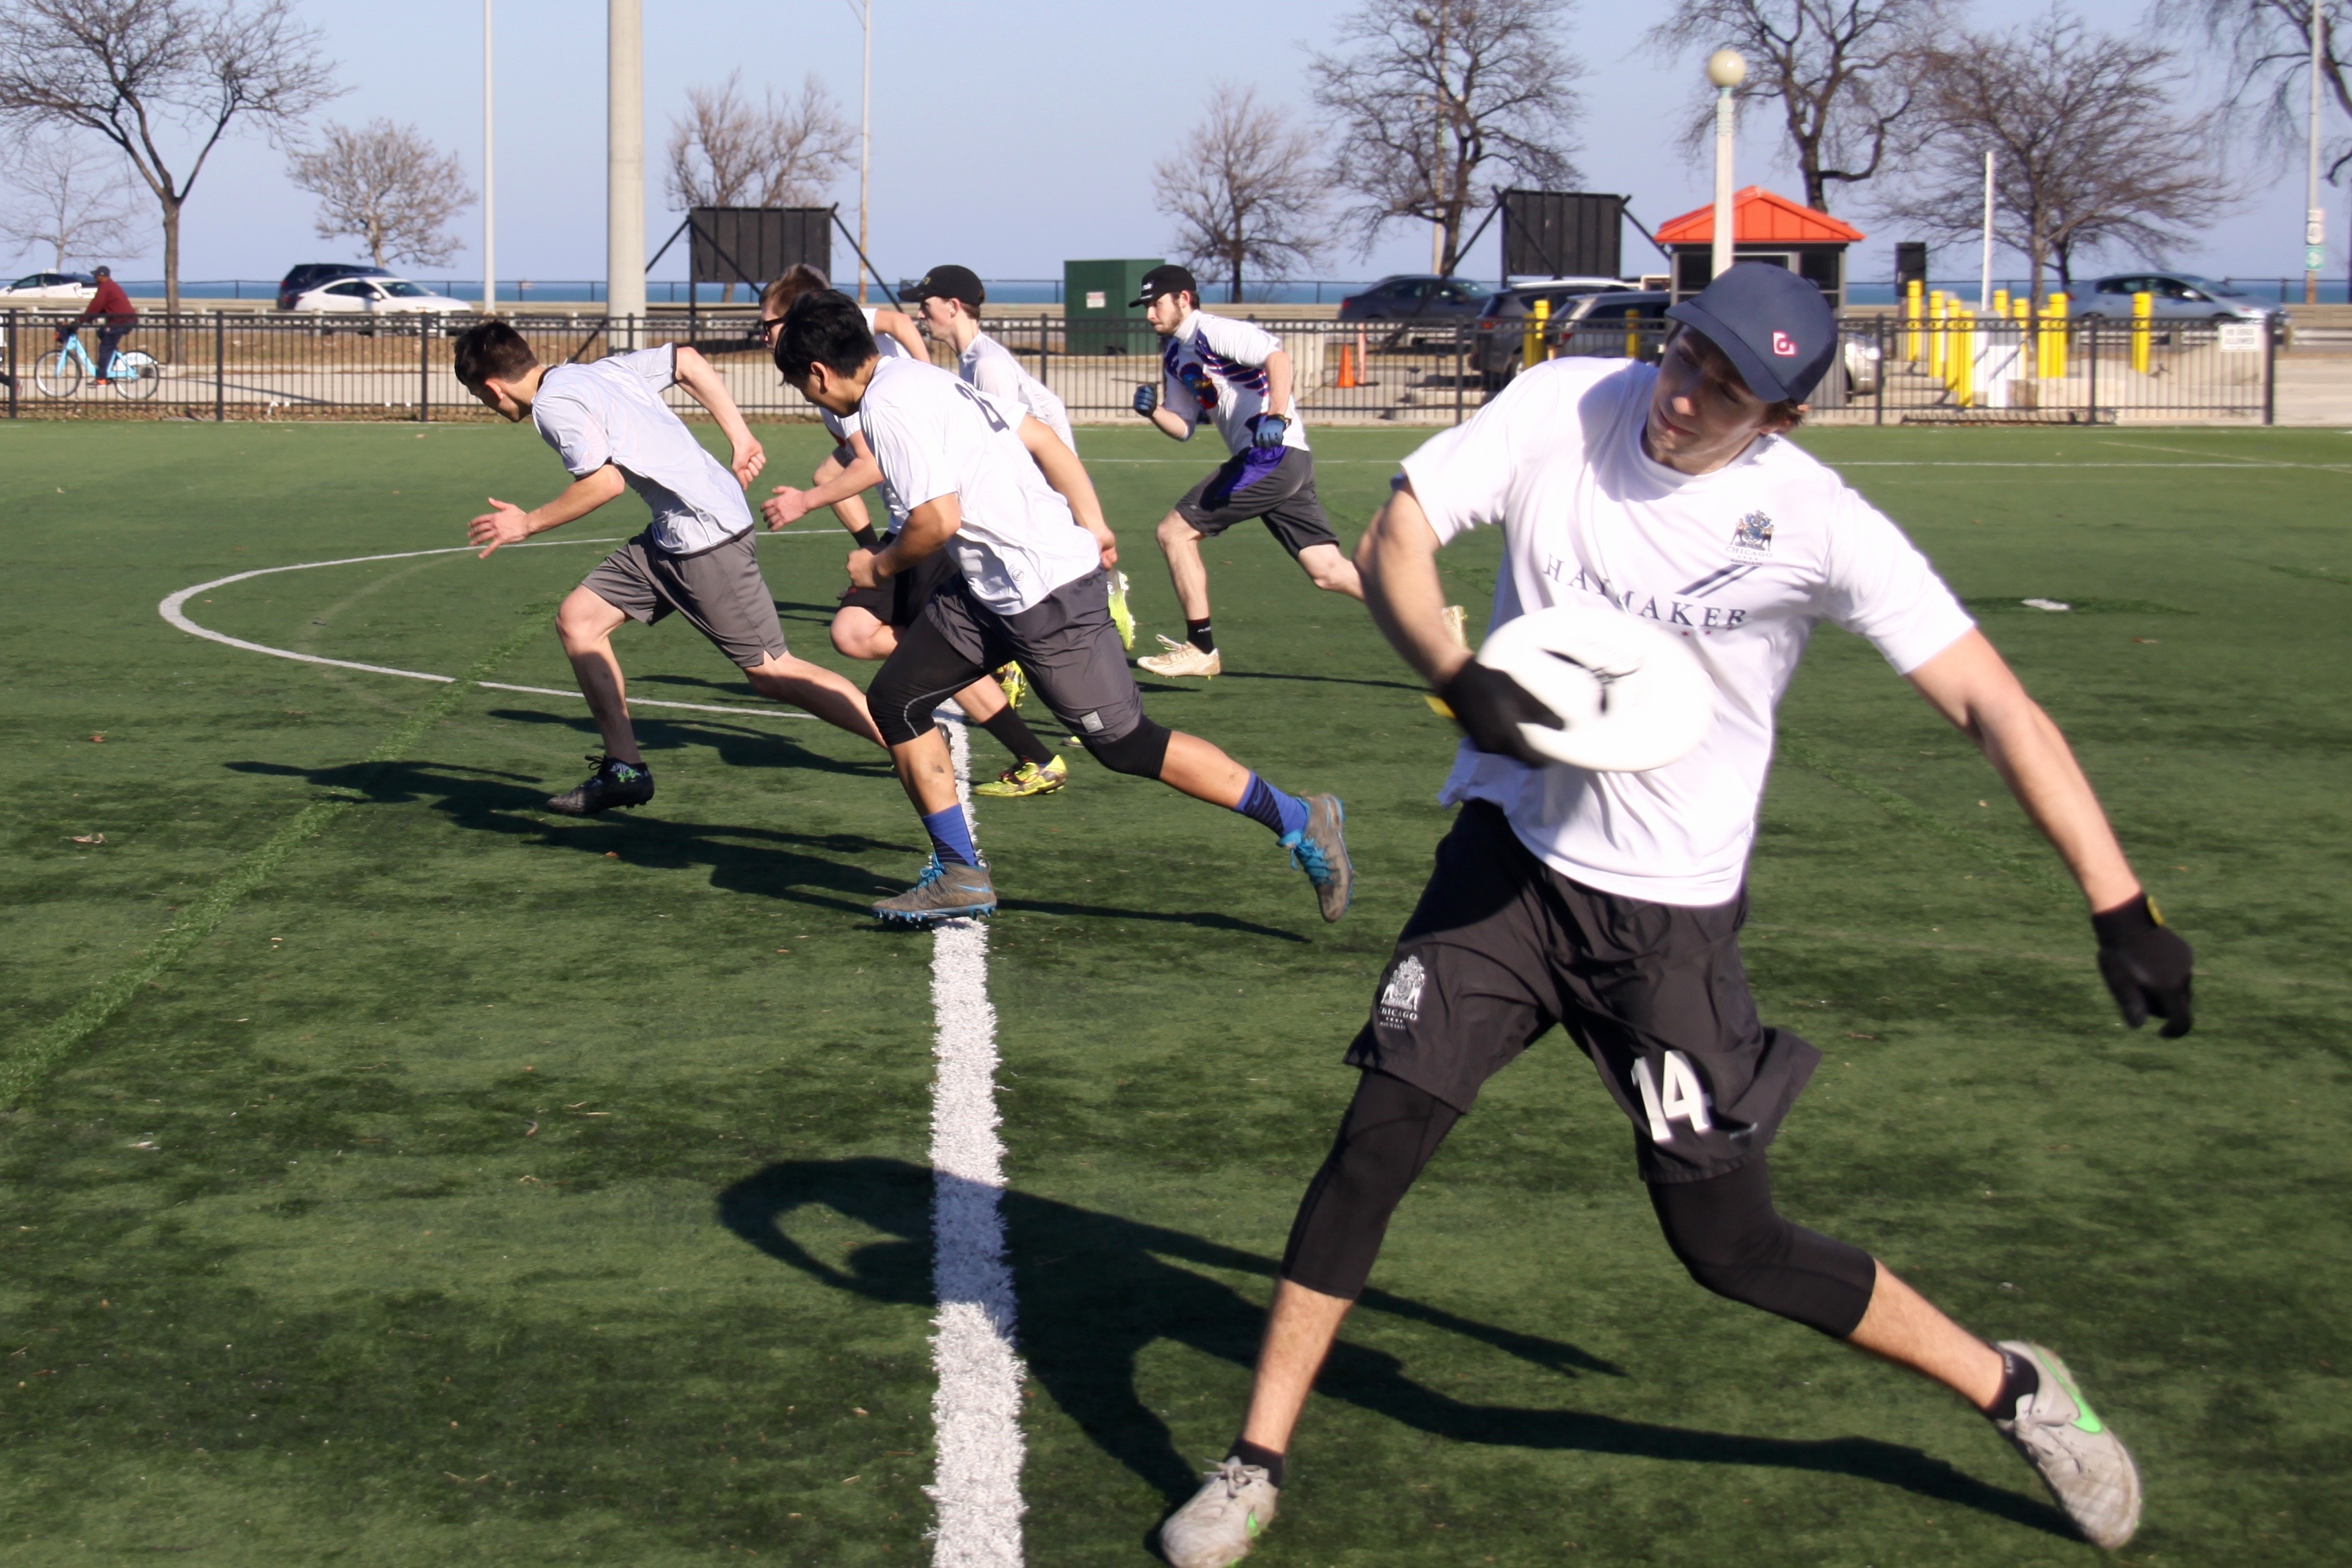 Tony Paoli throws a “pull” after his side scored during a scrimmage at a DePaul Ultimate Club practice on Jan. 21, 2017. (Photo/Ben Rains)